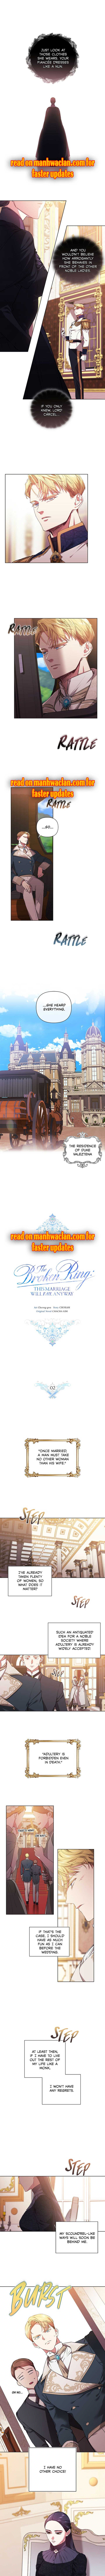 The Broken Ring : This Marriage Will Fail Anyway - Page 1